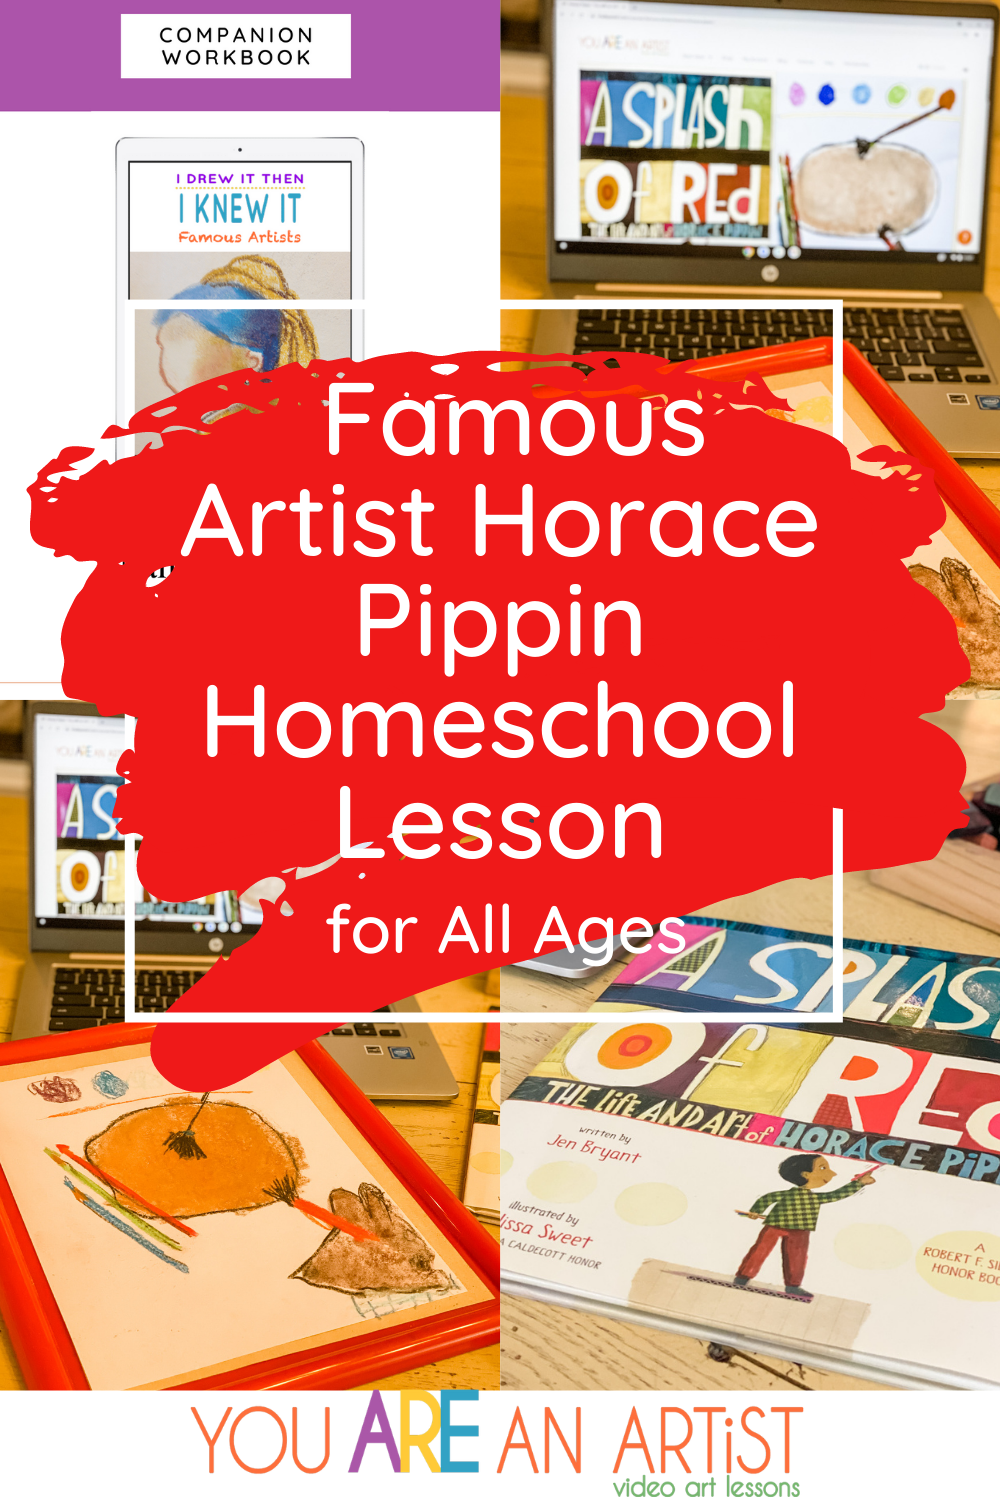 Enjoy homeschool art appreciation with famous artists! Our Horace Pippin homeschool art lesson is great for any age. #horacepippin #famousartists #homeschoolart #onlineartlessons 